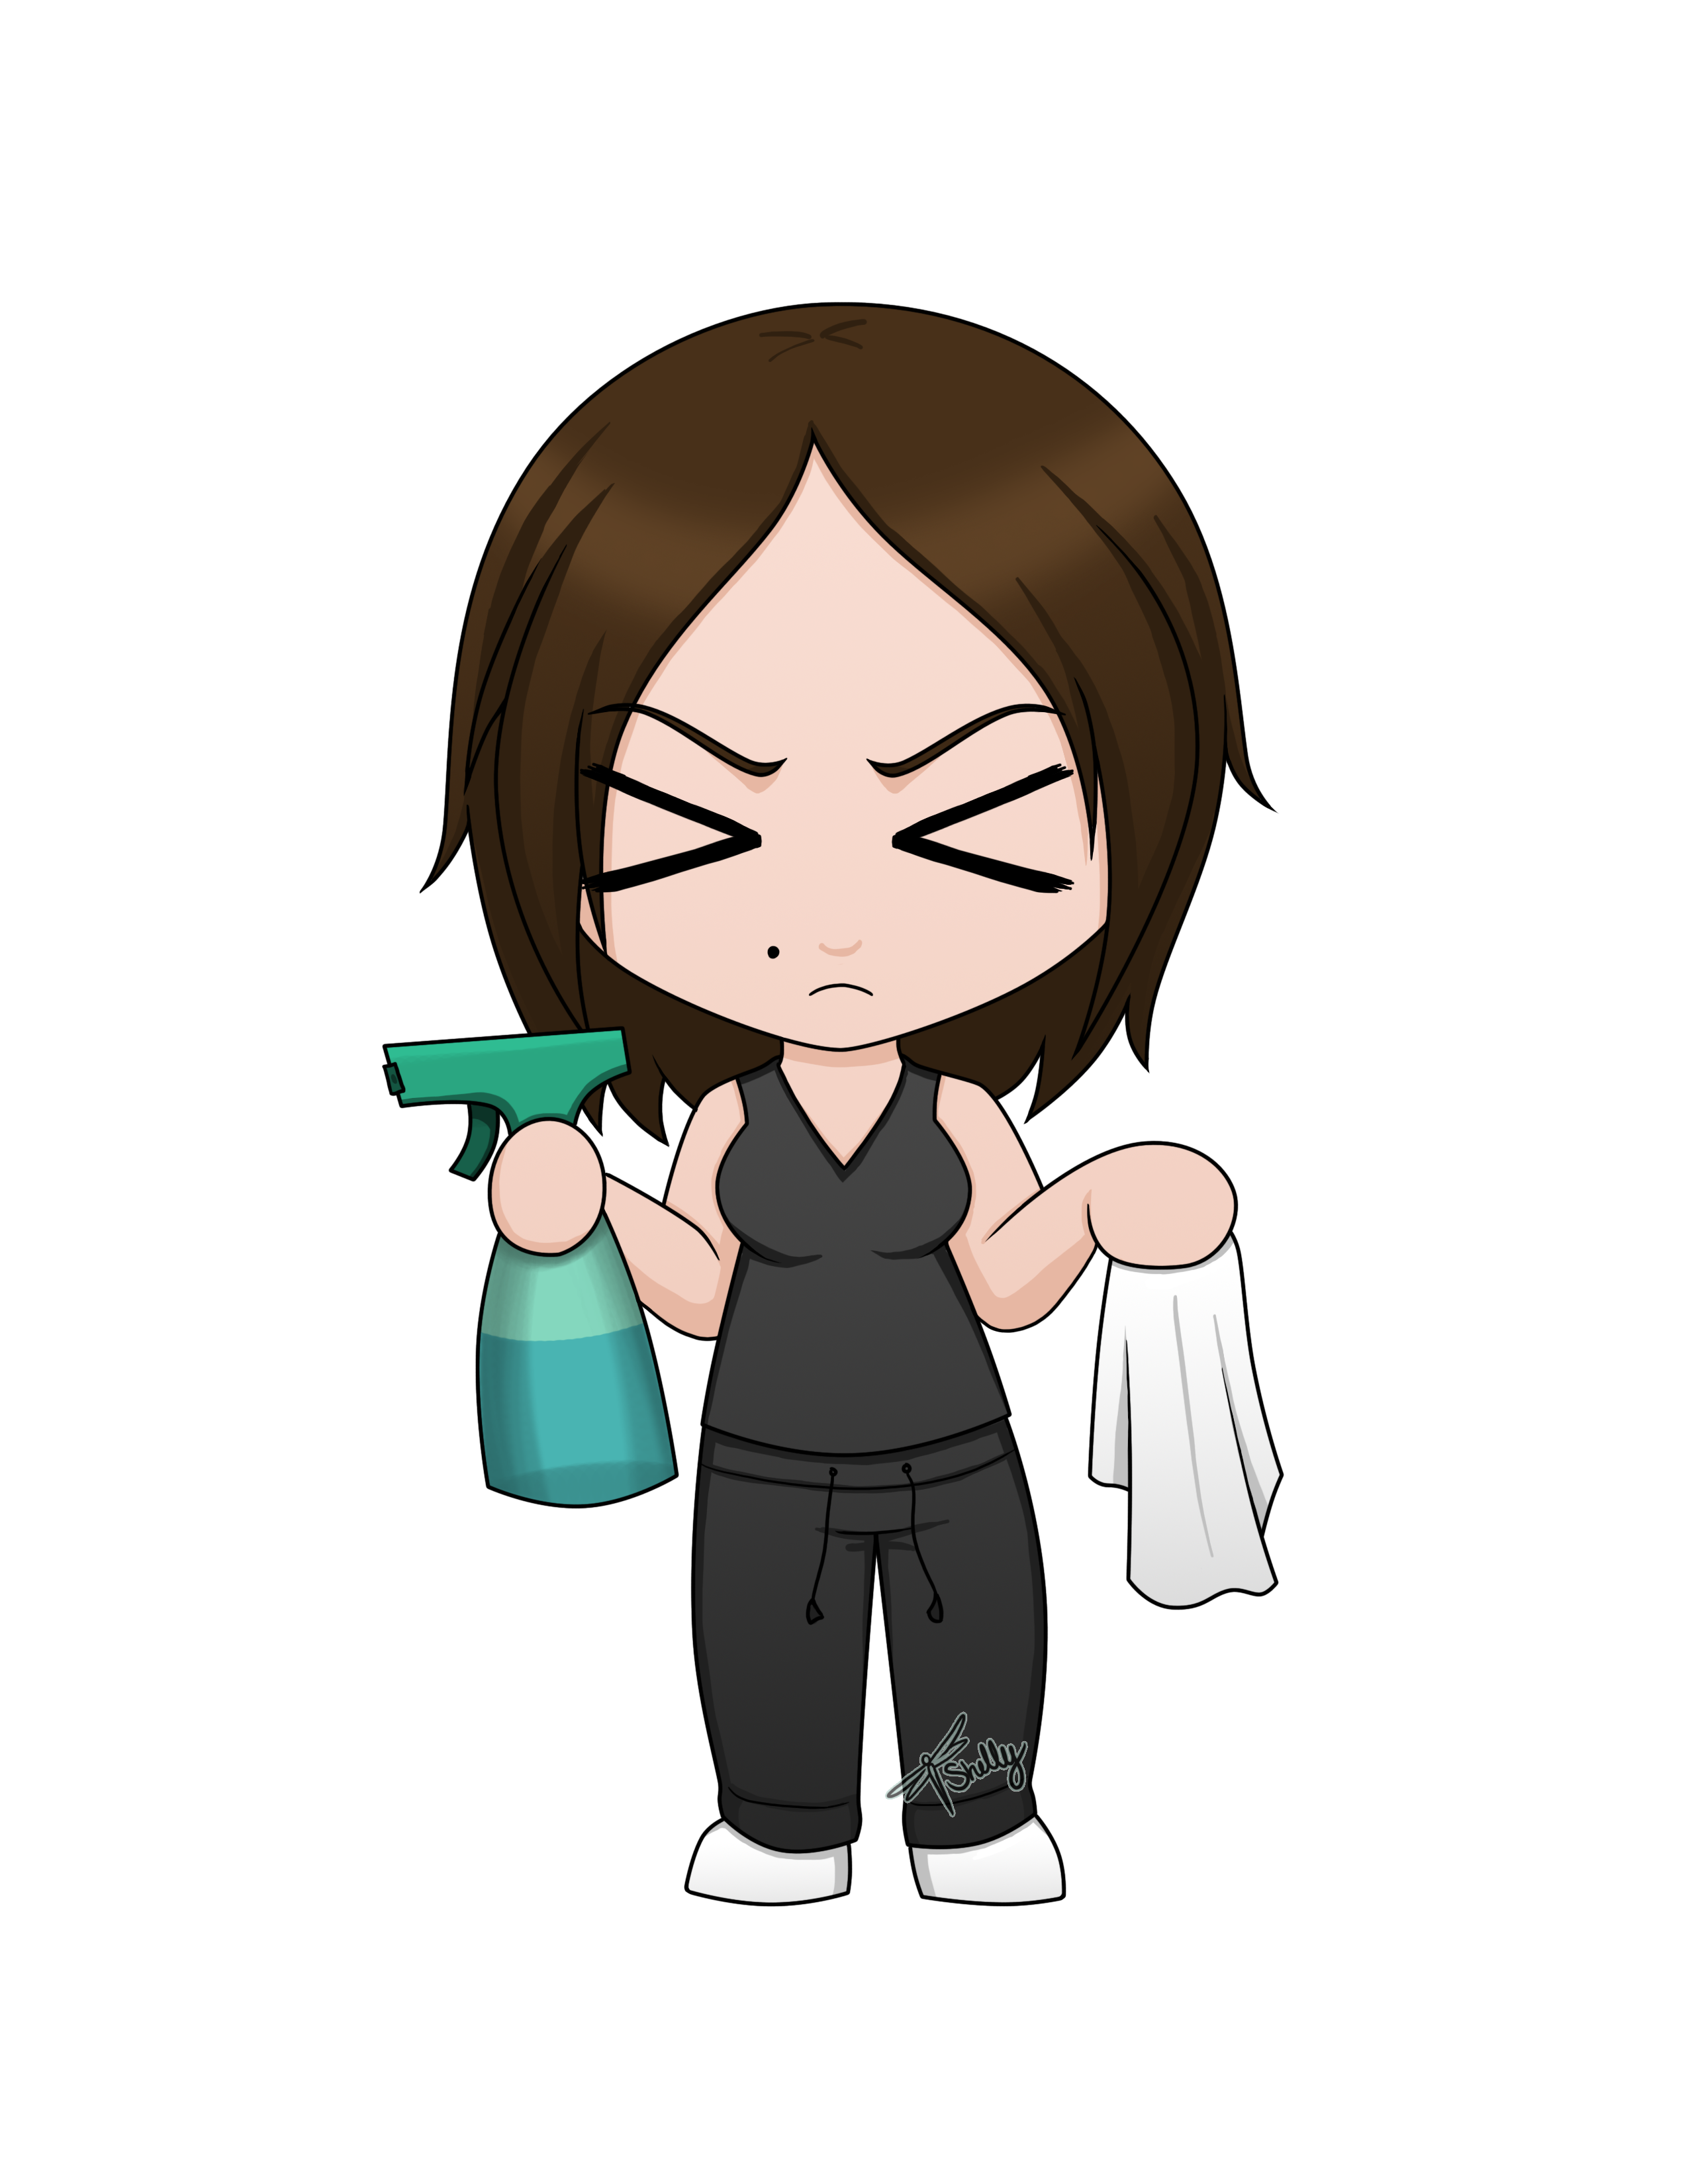 Clean clipart hospital housekeeping. About me the bad